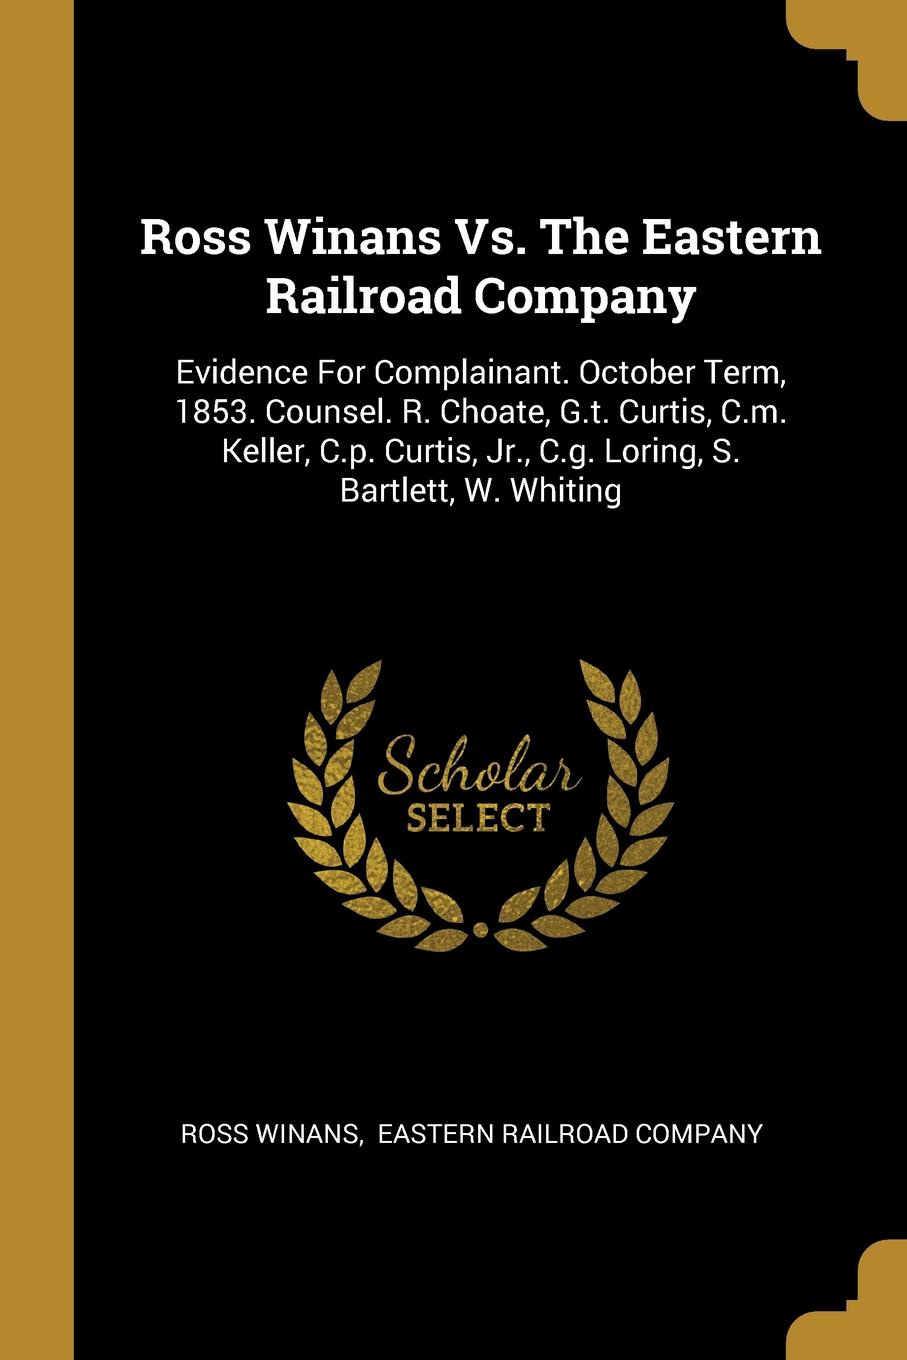 Ross Winans Vs. The Eastern Railroad Company. Evidence For Complainant. October Term, 1853. Counsel. R. Choate, G.t. Curtis, C.m. Keller, C.p. Curtis, Jr., C.g. Loring, S. Bartlett, W. Whiting